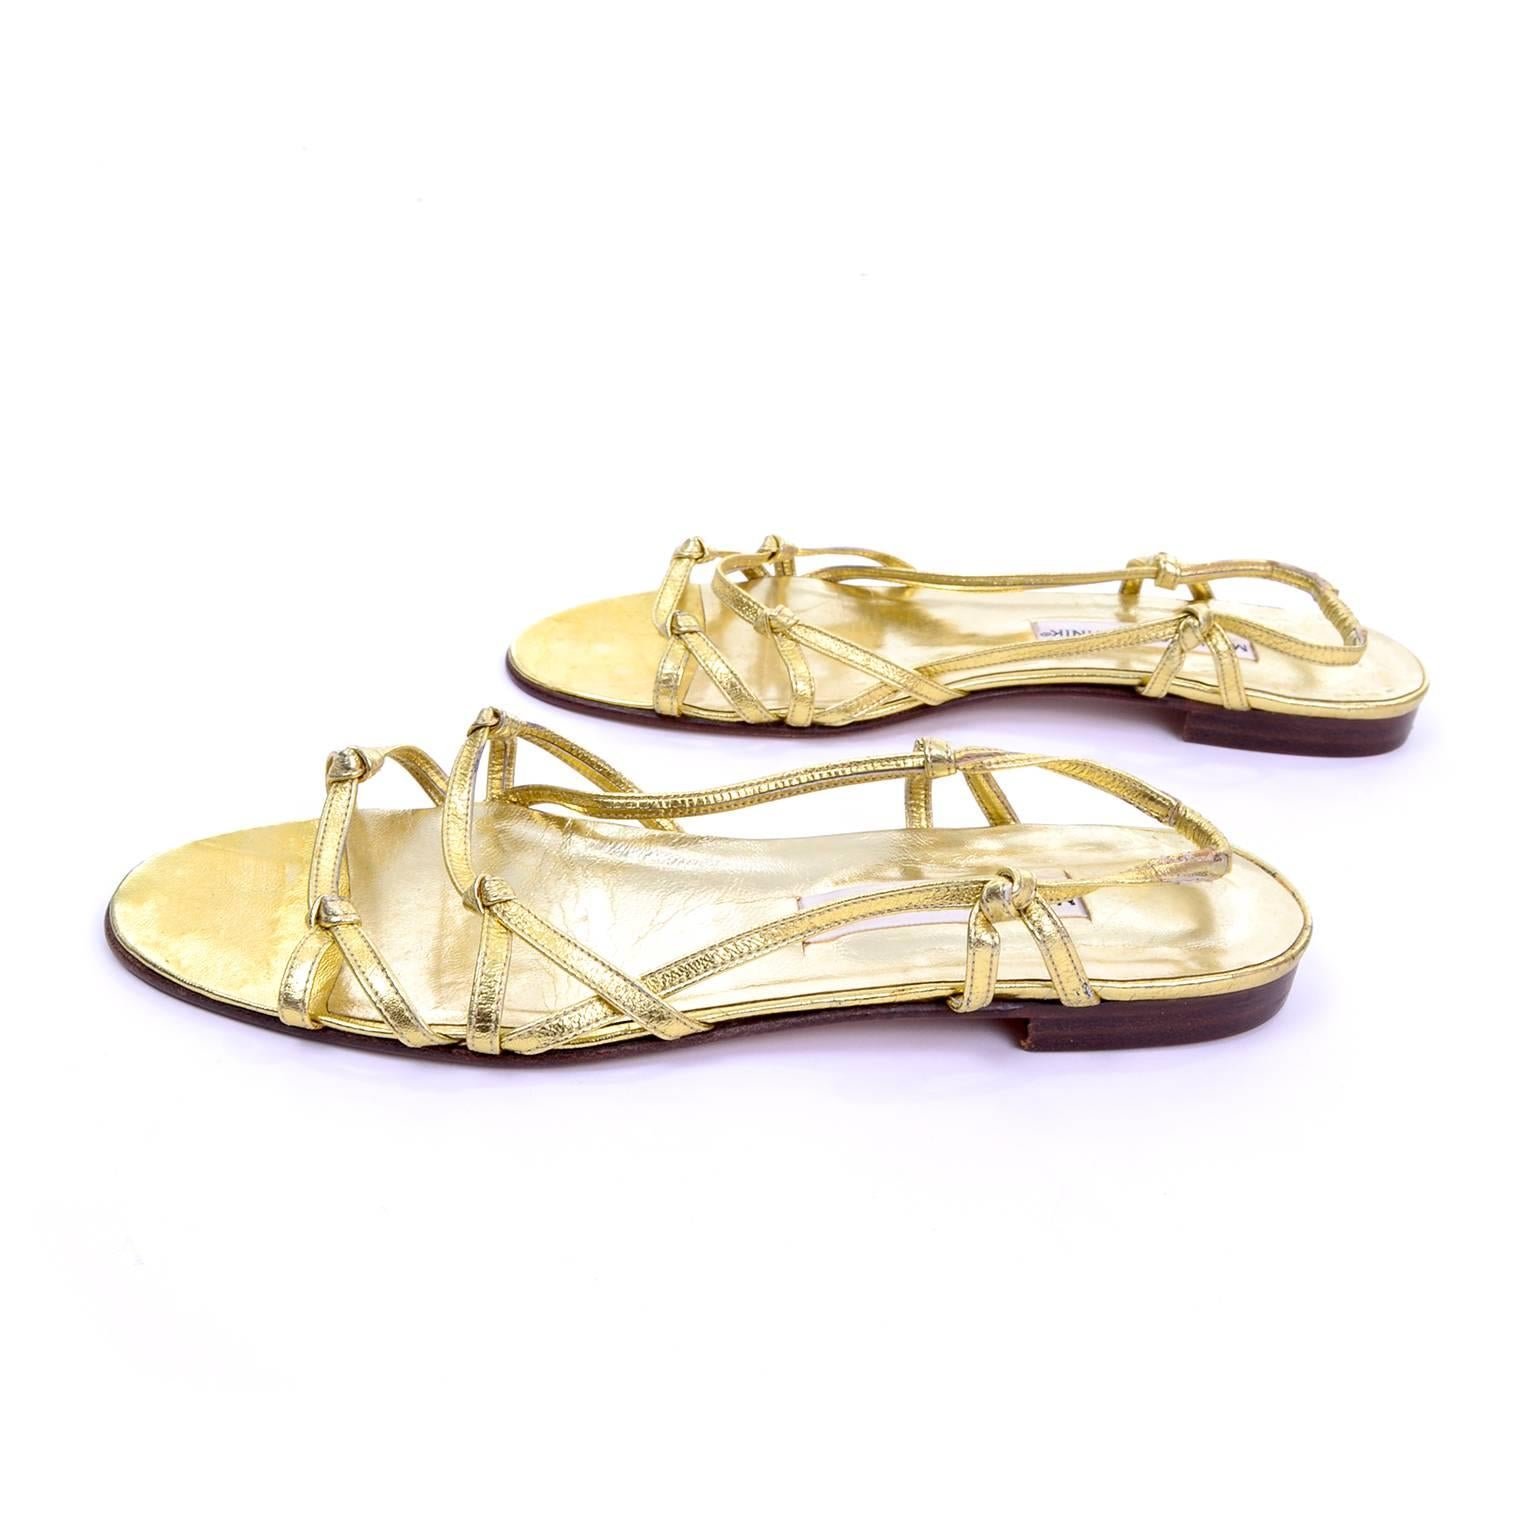 These summer slip-on sandals by Manolo Blahnik London have two knotted gold leather straps across the upper, and an ankle strap that is knotted on each side, with elastic on the back. These sandals have leather soles and have never been worn. They